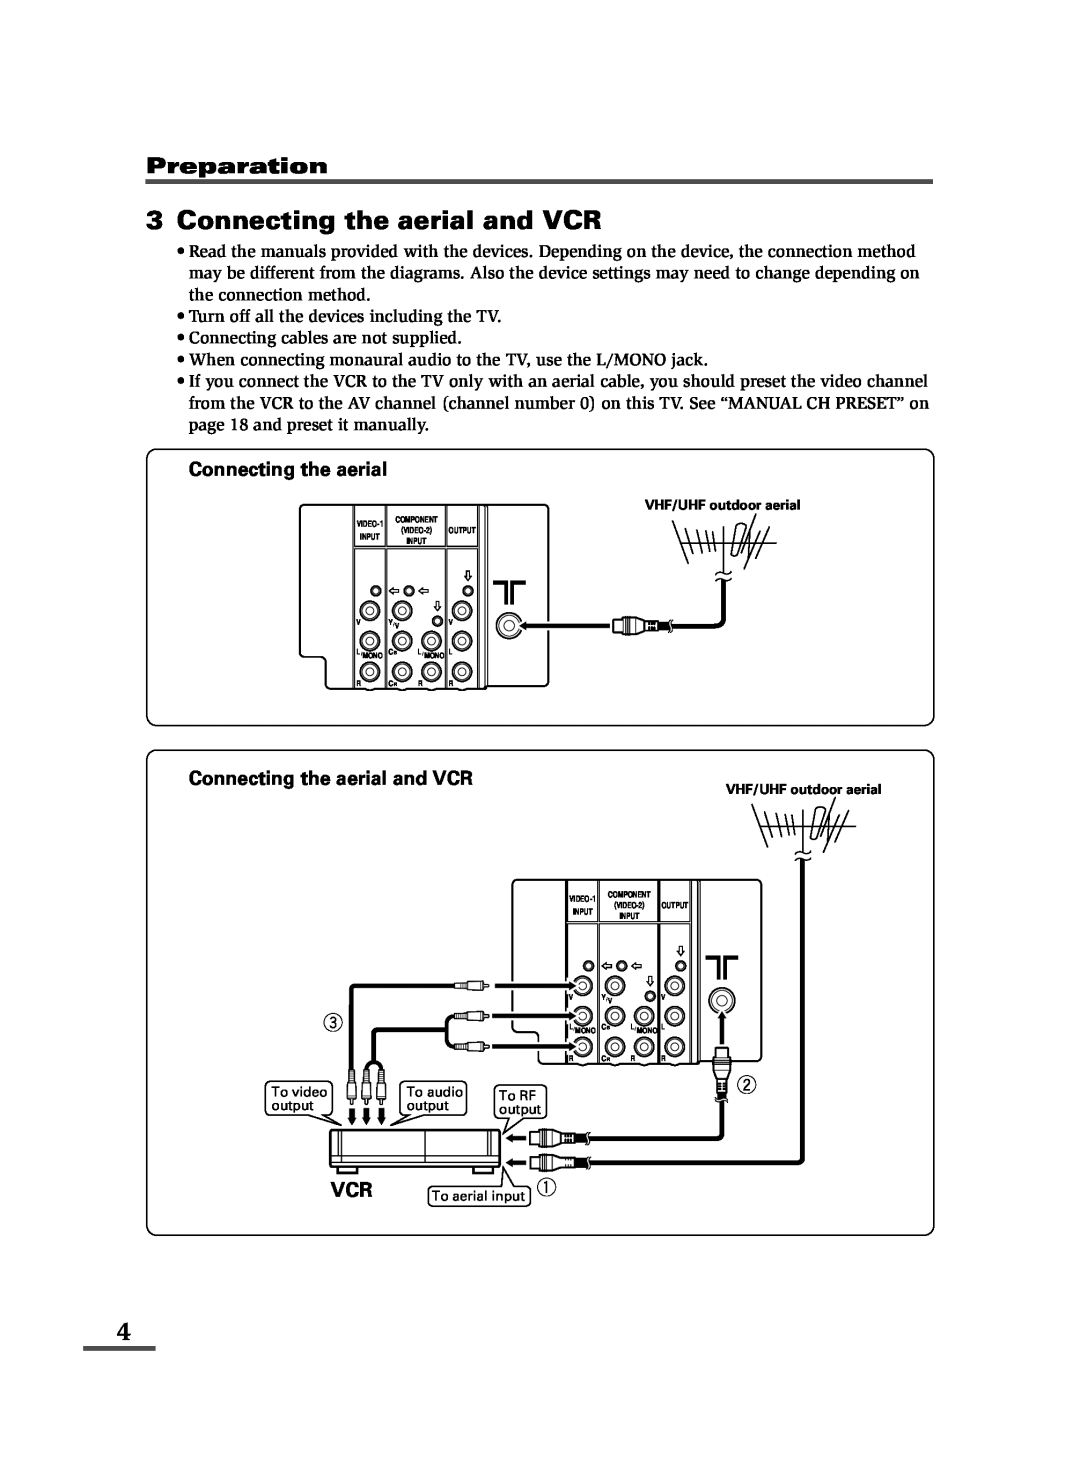 JVC specifications Connecting the aerial and VCR, Preparation 